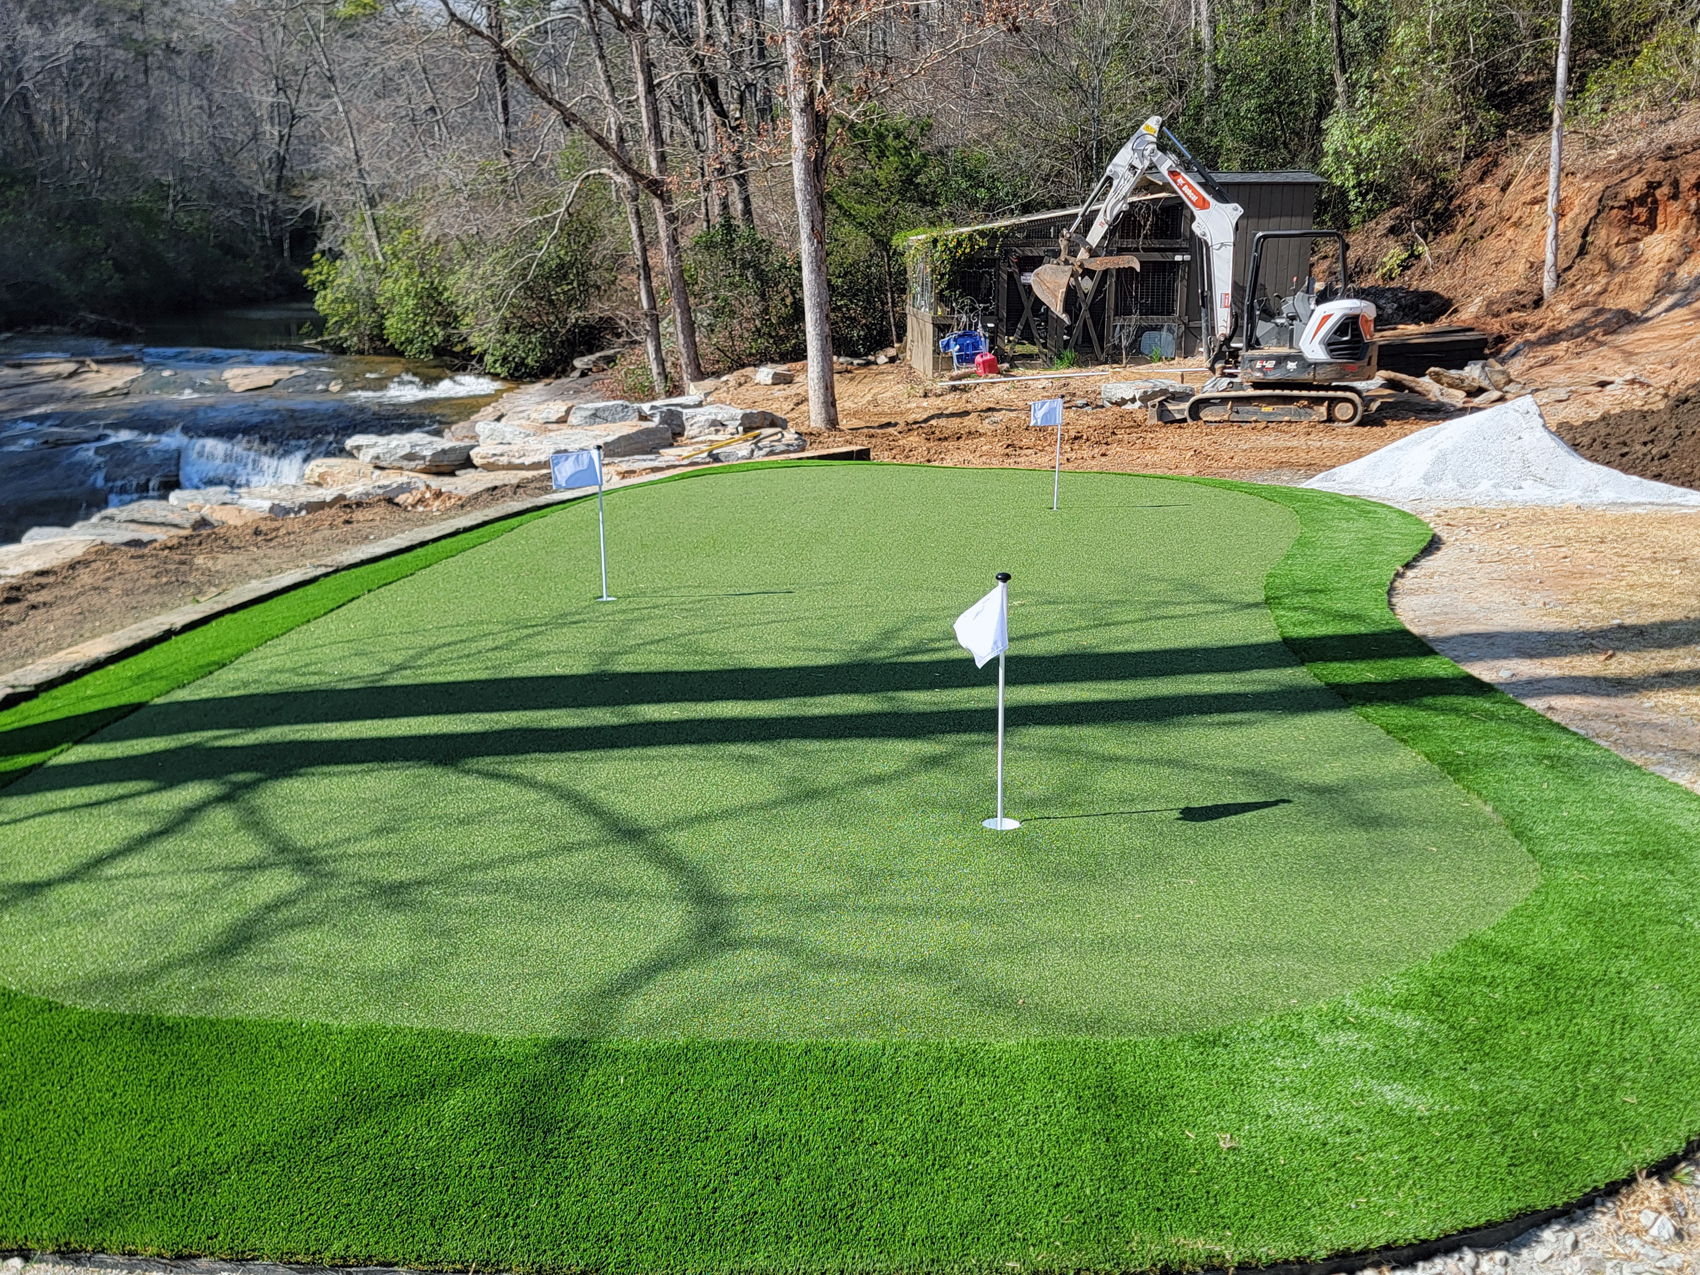 Synthetic turf putting green by Synthetic Turf Concepts, elegantly set beside a beautiful body of water and rocky landscape, merging sport with nature.